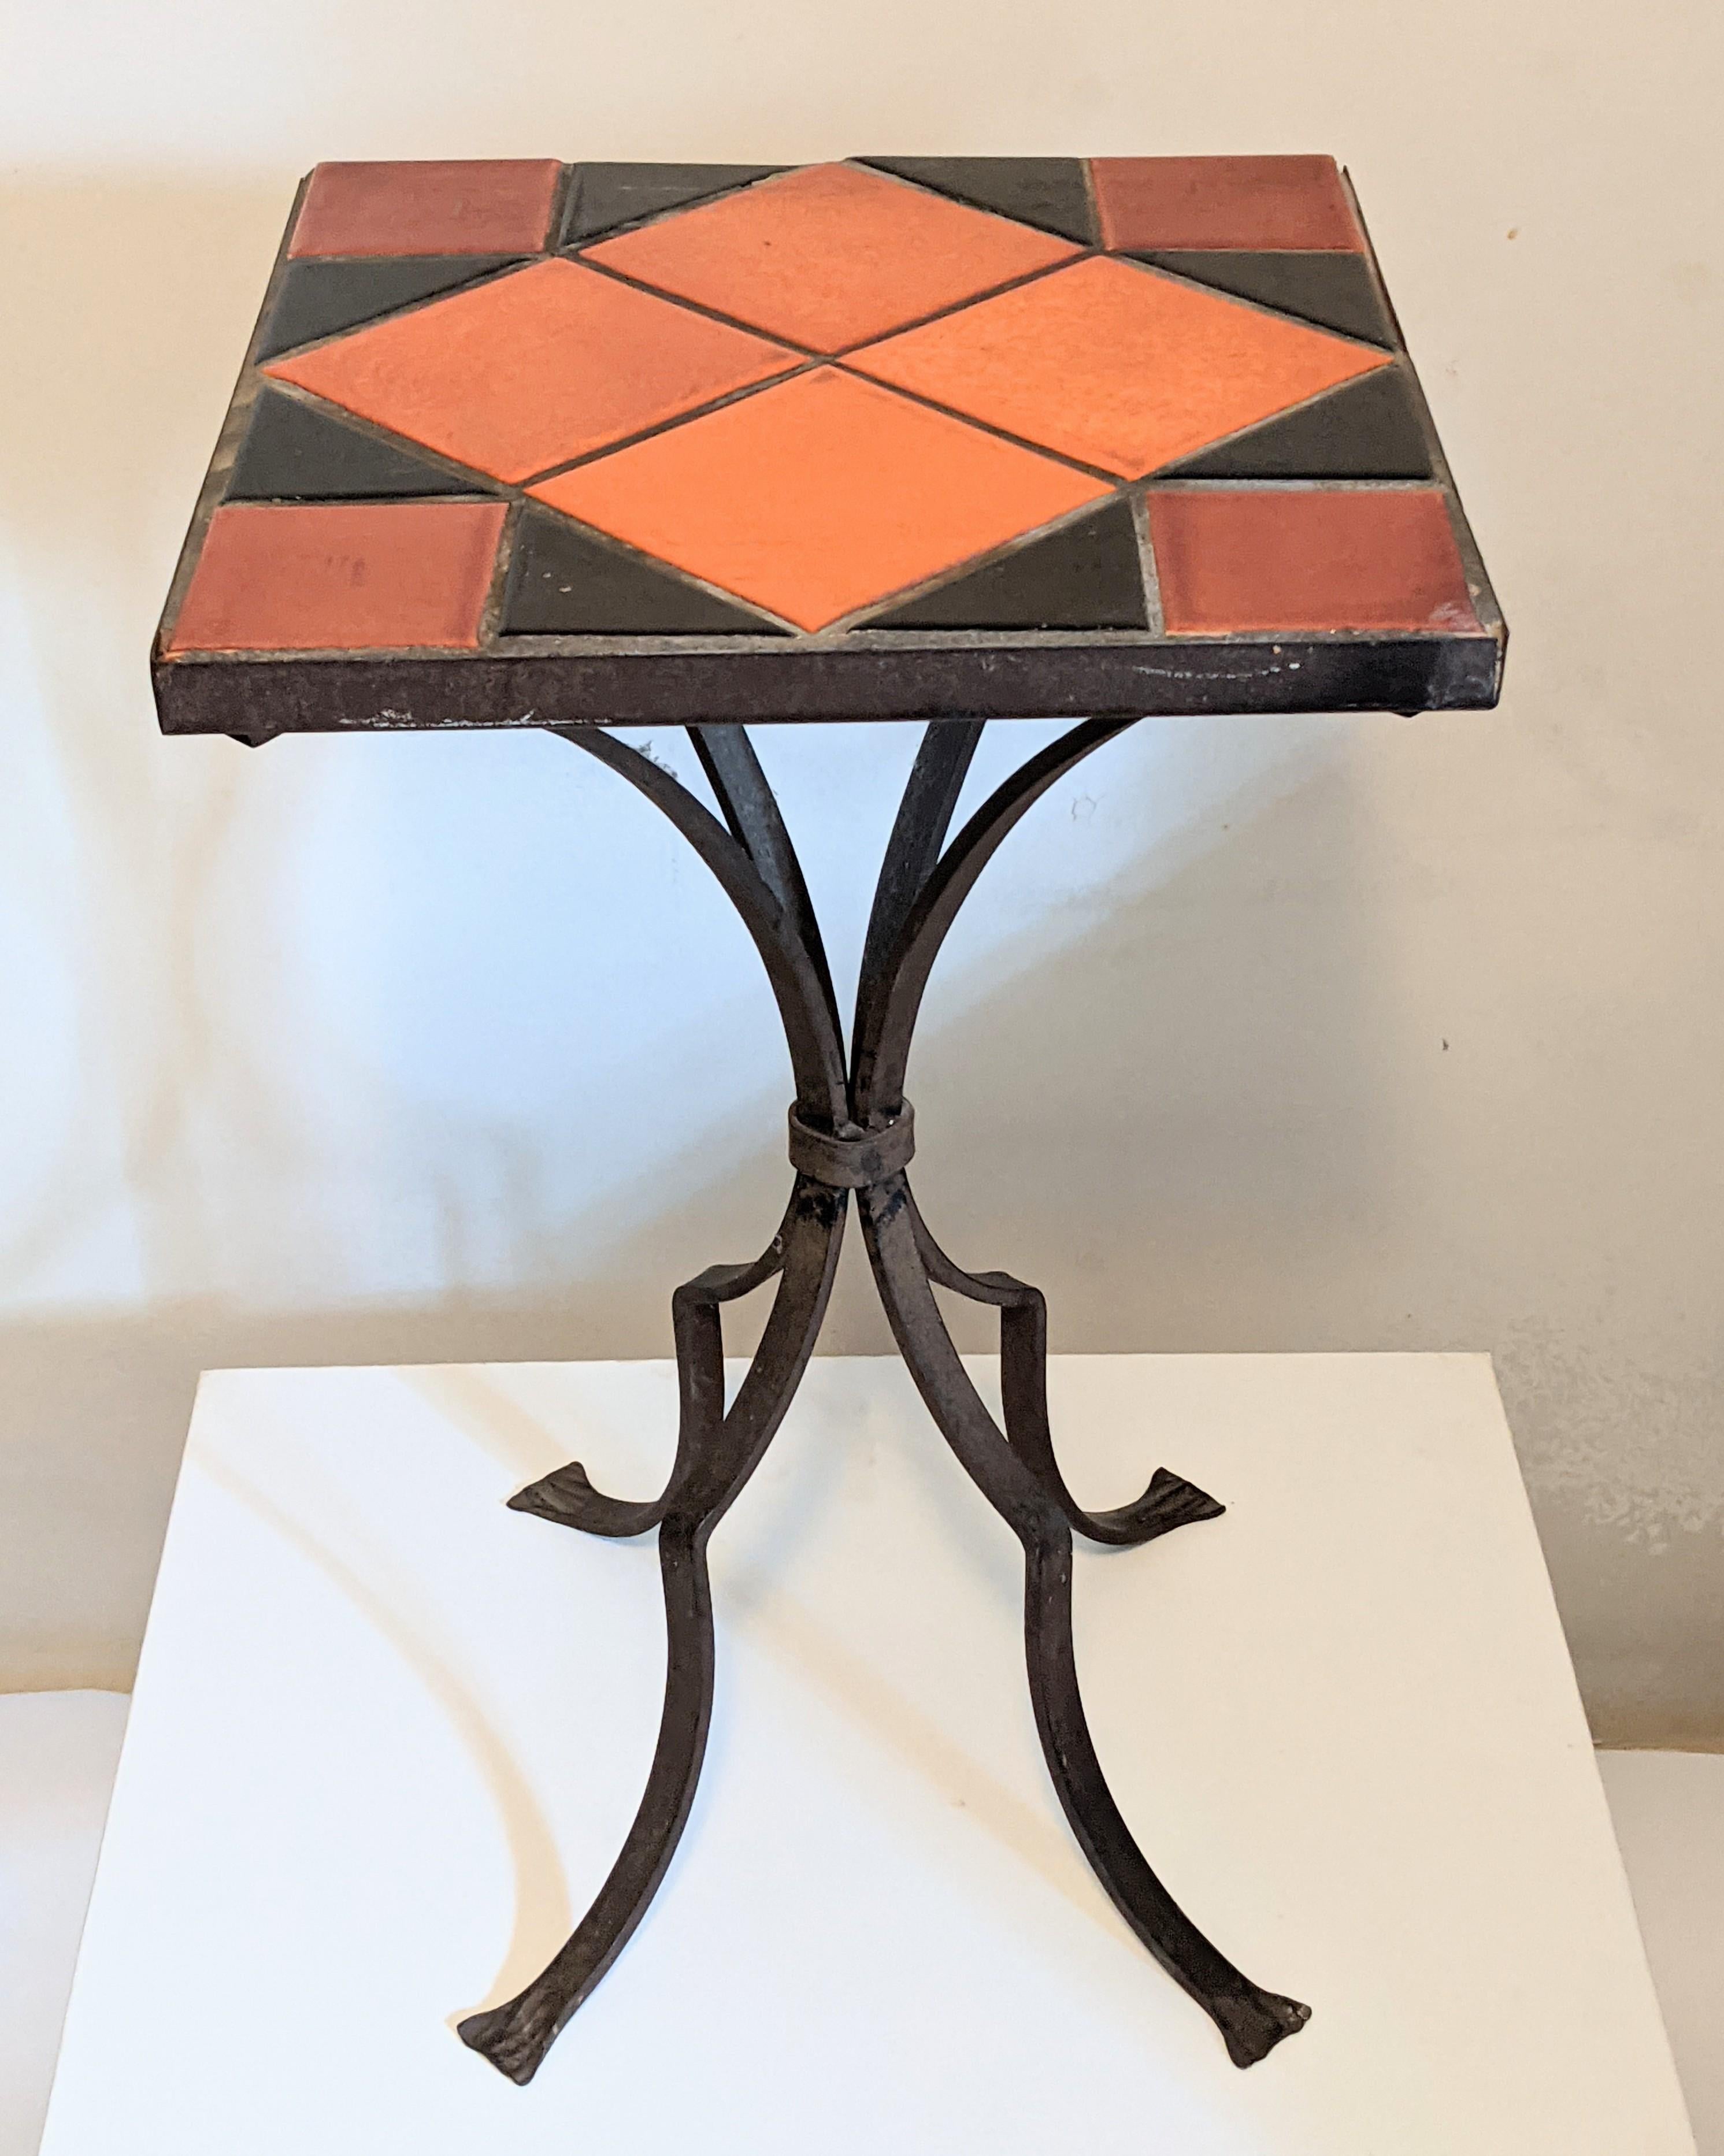 Decorative and charming California Tile Wrought Iron Table from the 1940's in tones of burnt orange and black. 12.75